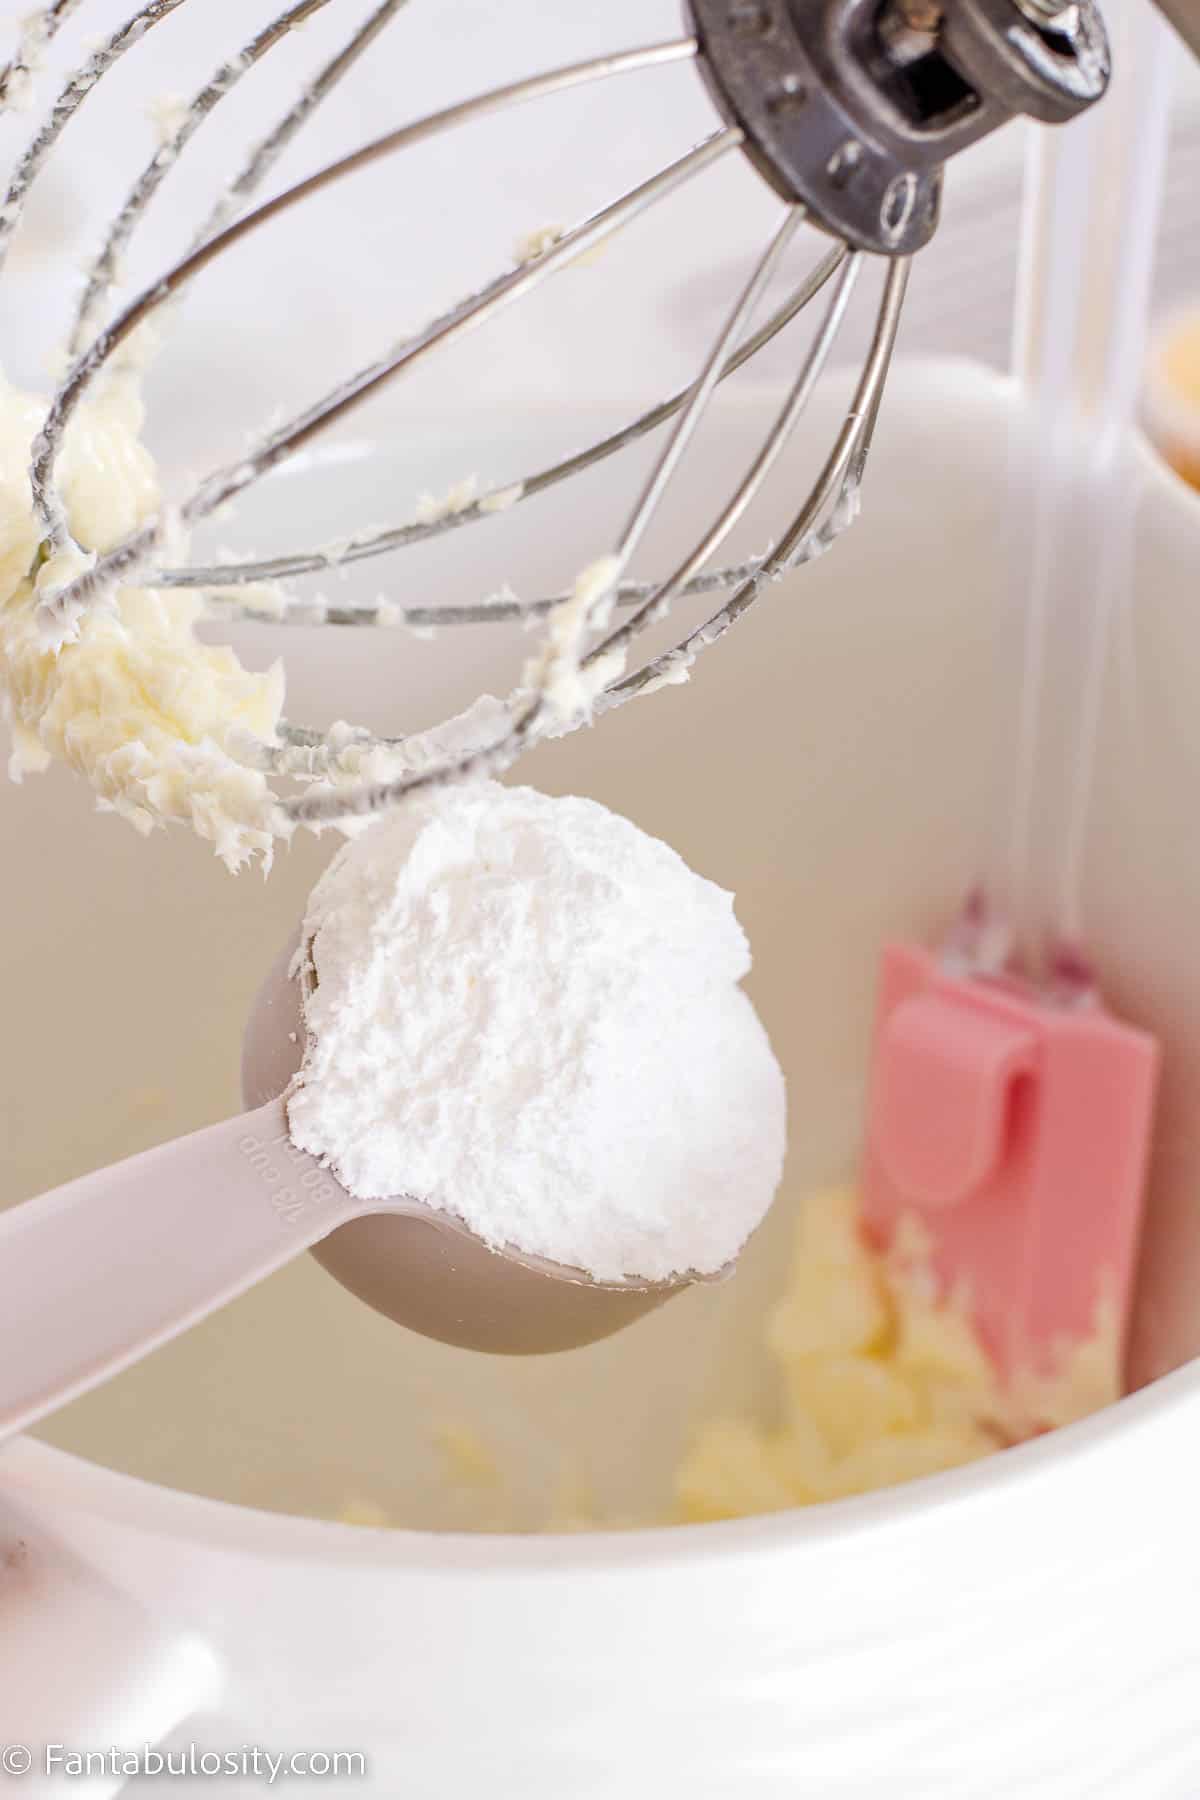 Powdered sugar pouring in to mixing bowl